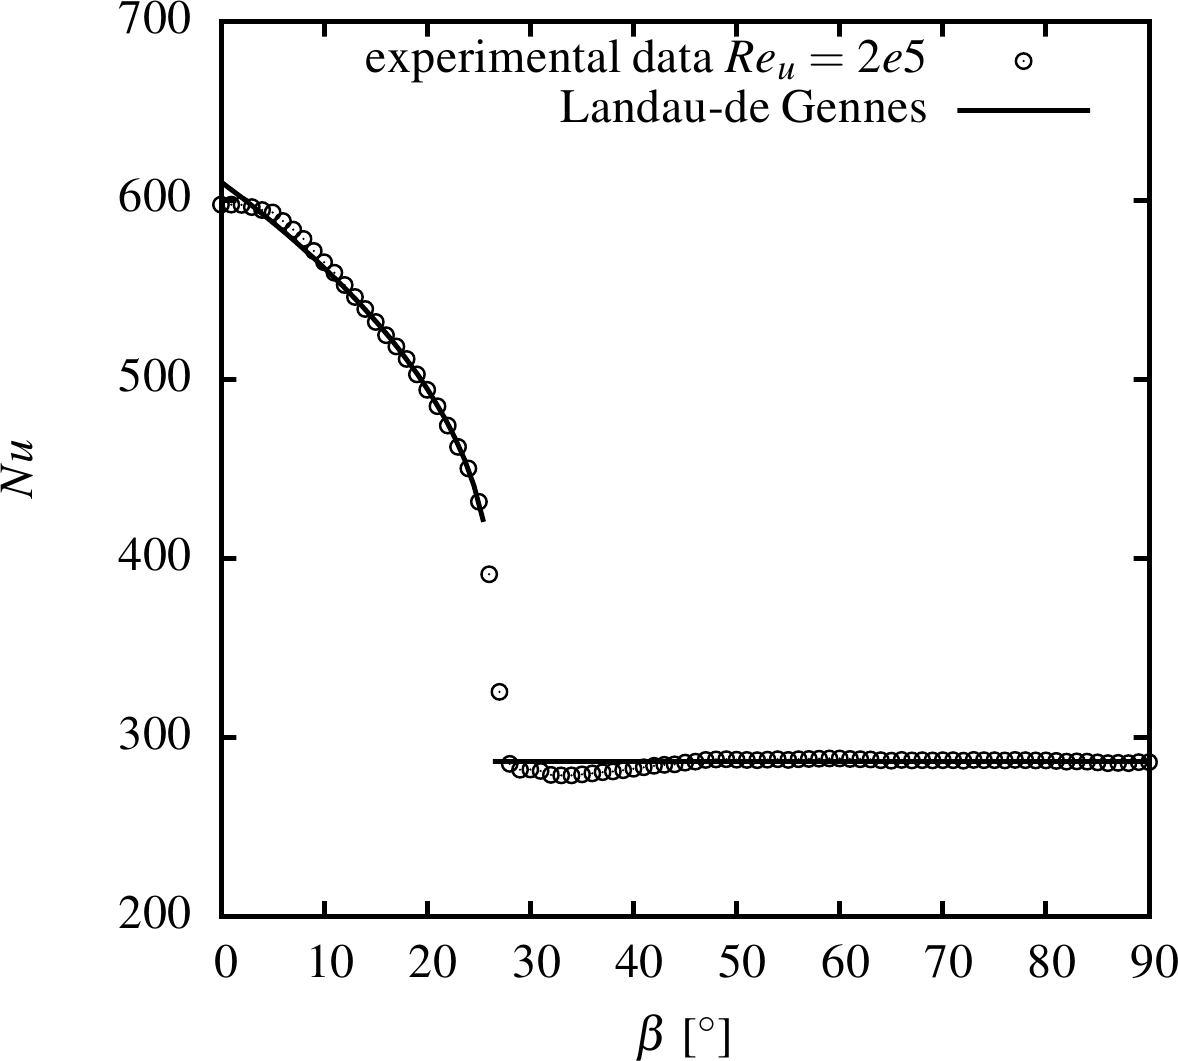 Mean nusselt number as a function of incidence